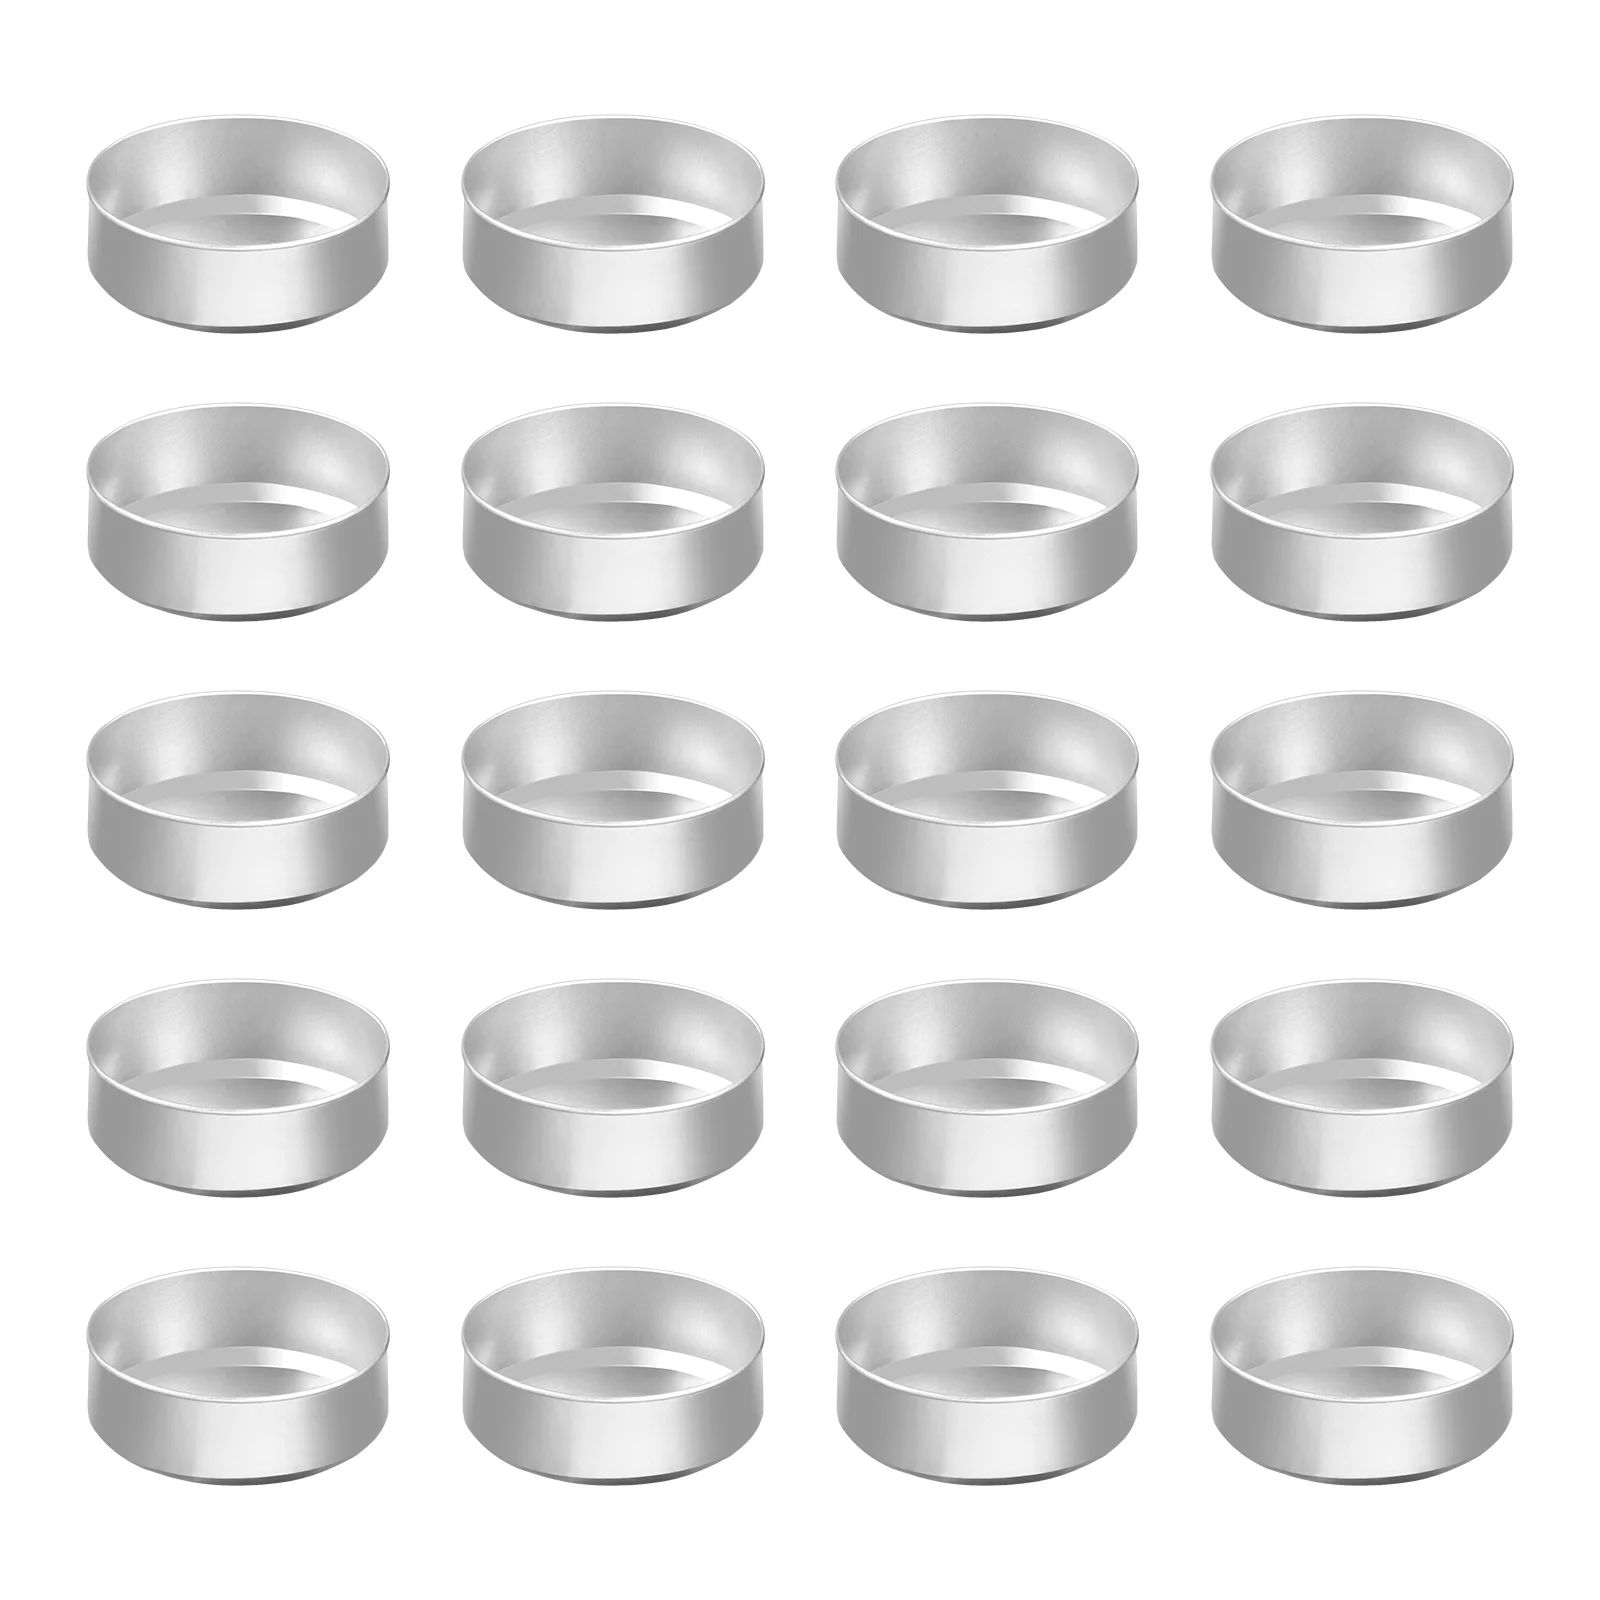 

SUPVOX 200pcs Aluminum Tea Light Tins Can Scented Making Container Empty Case for Holding DIY Making (Silver)